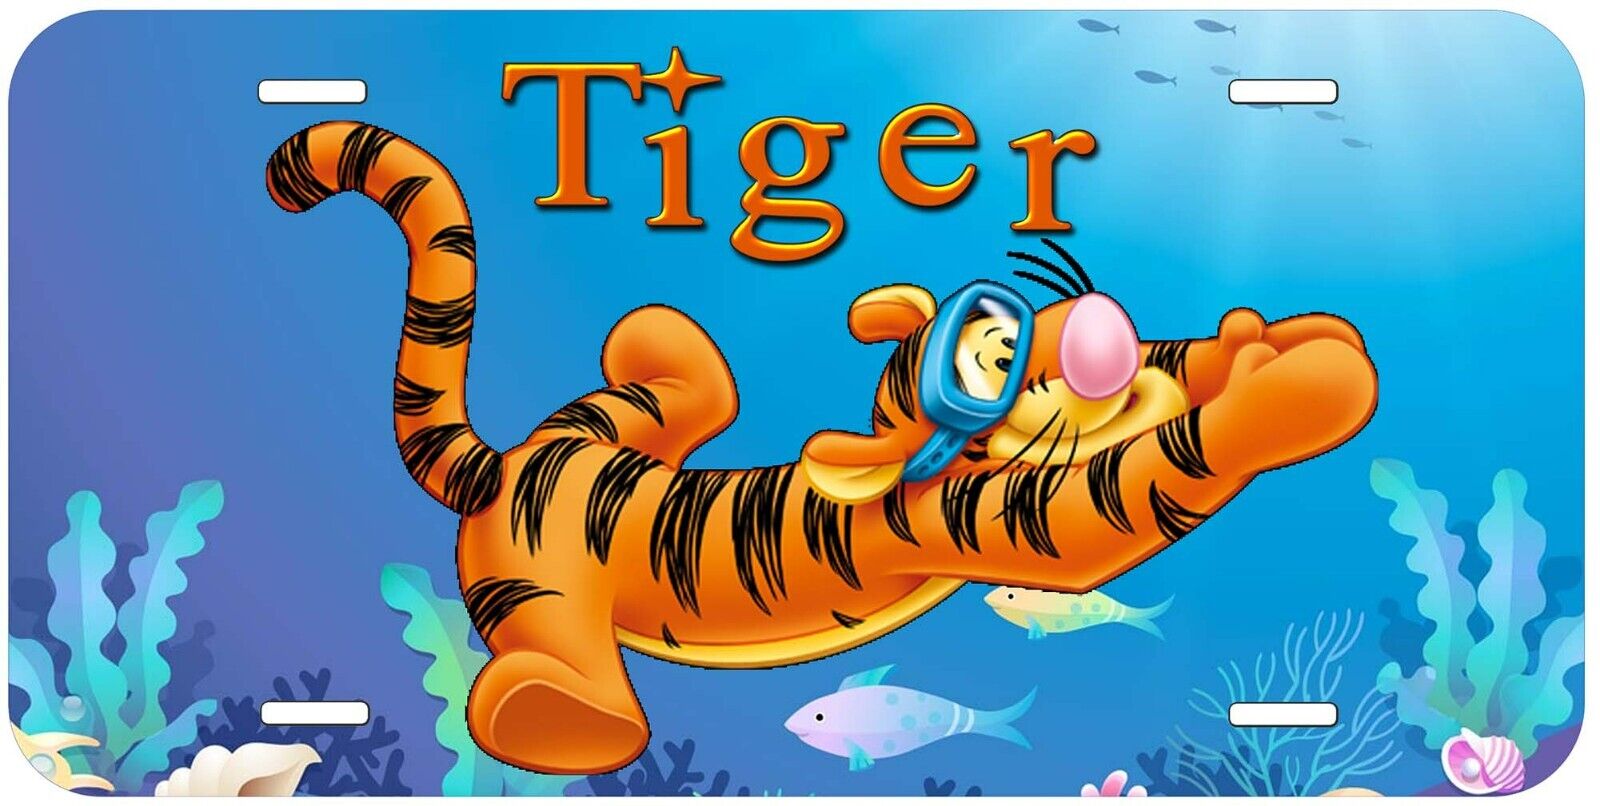 Tiger Under Water Aluminum Car Tag Novelty License Plate